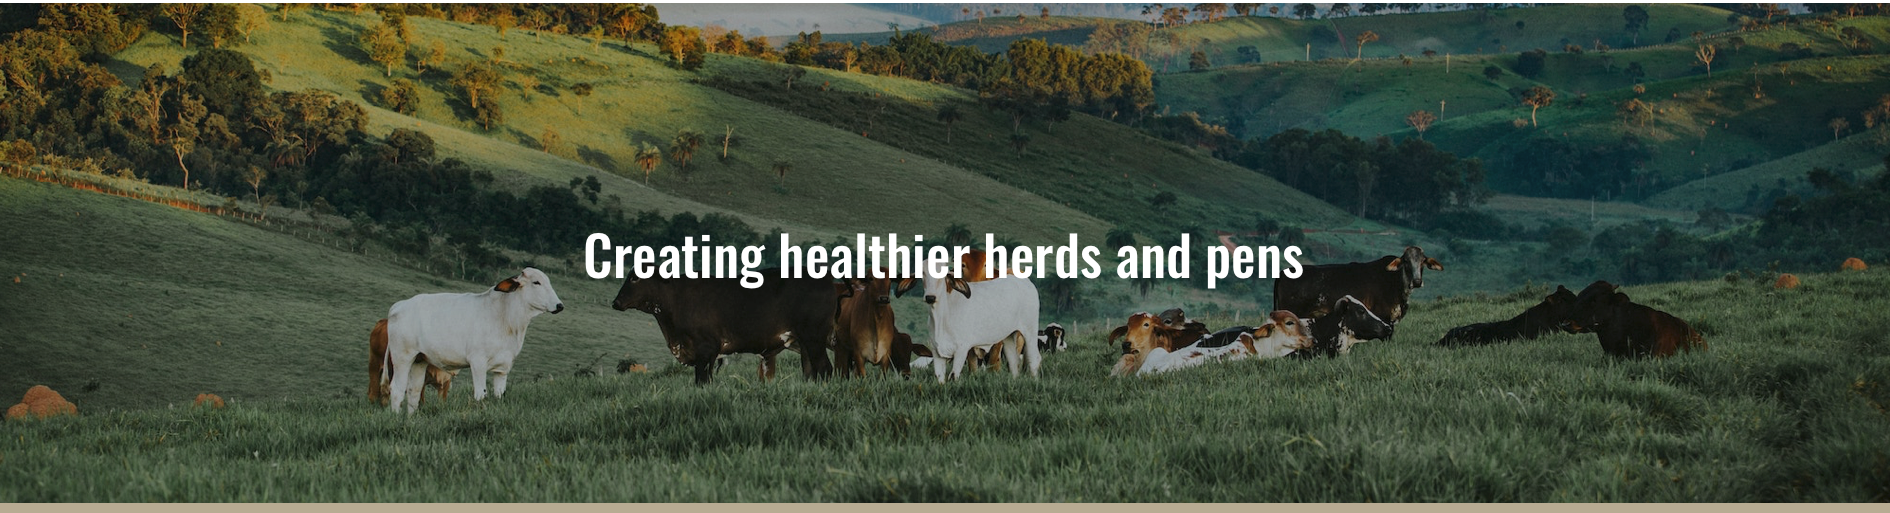 Hero image that says "creating healthier herds and pens"